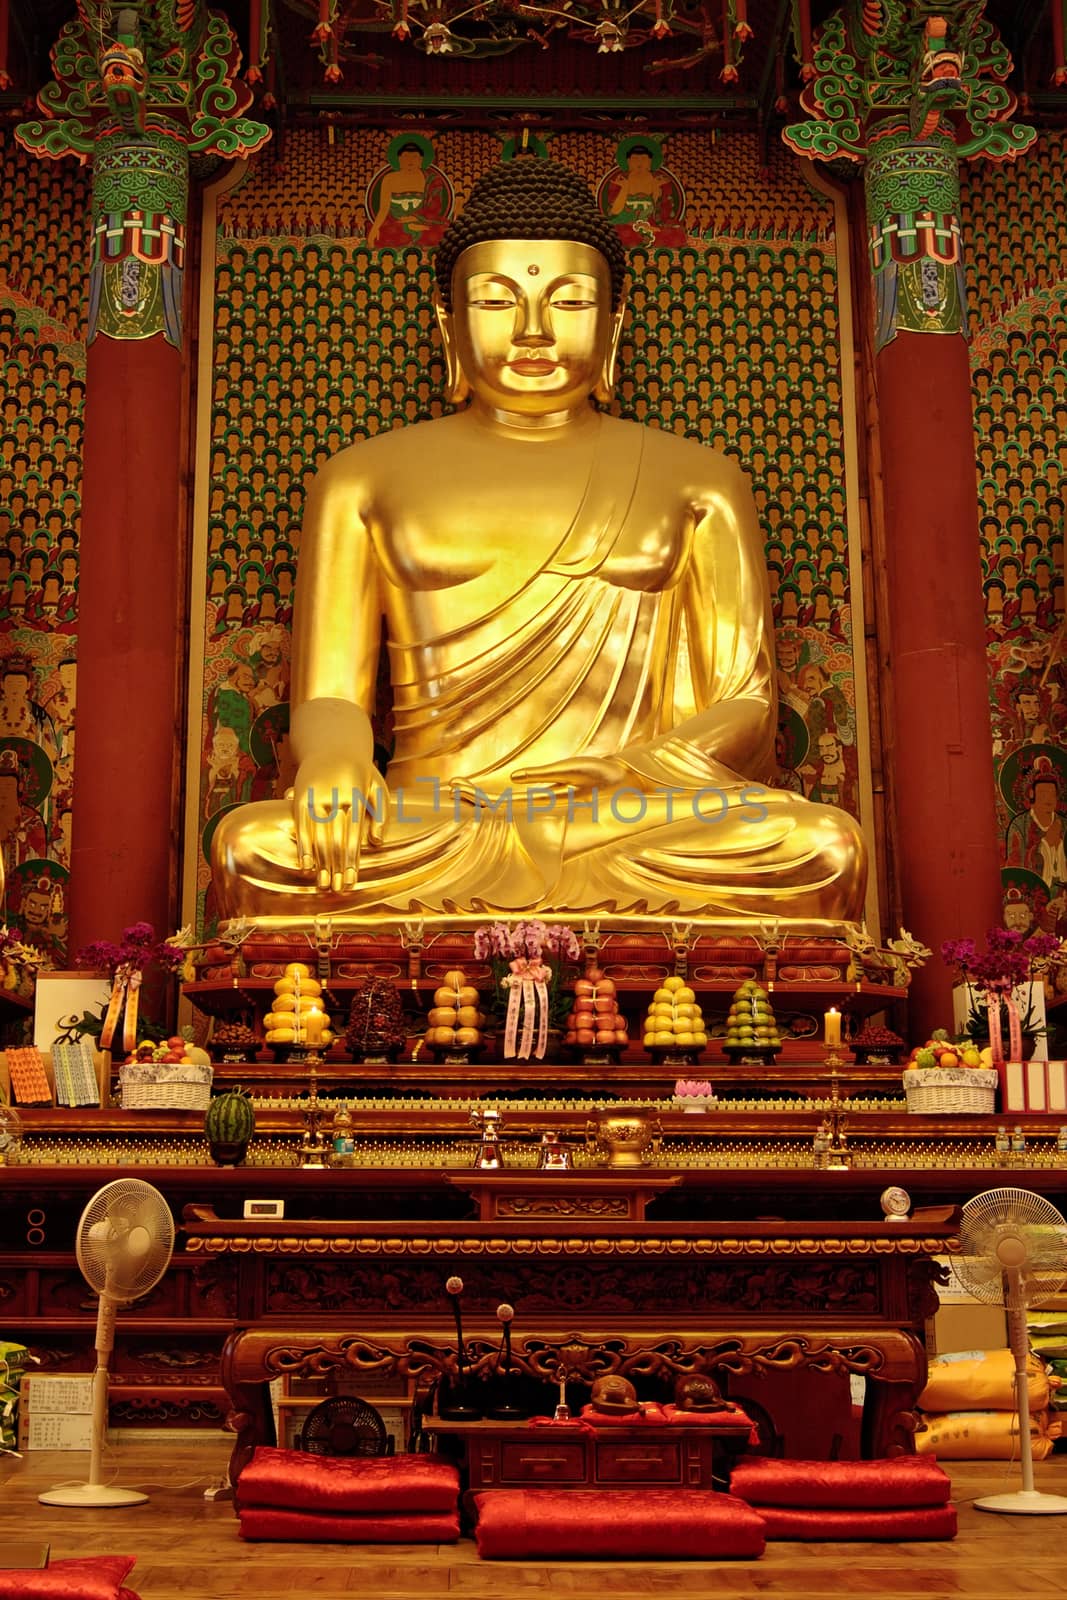 Golden Buddha in Jogyesa temple (Seoul) by dsmsoft